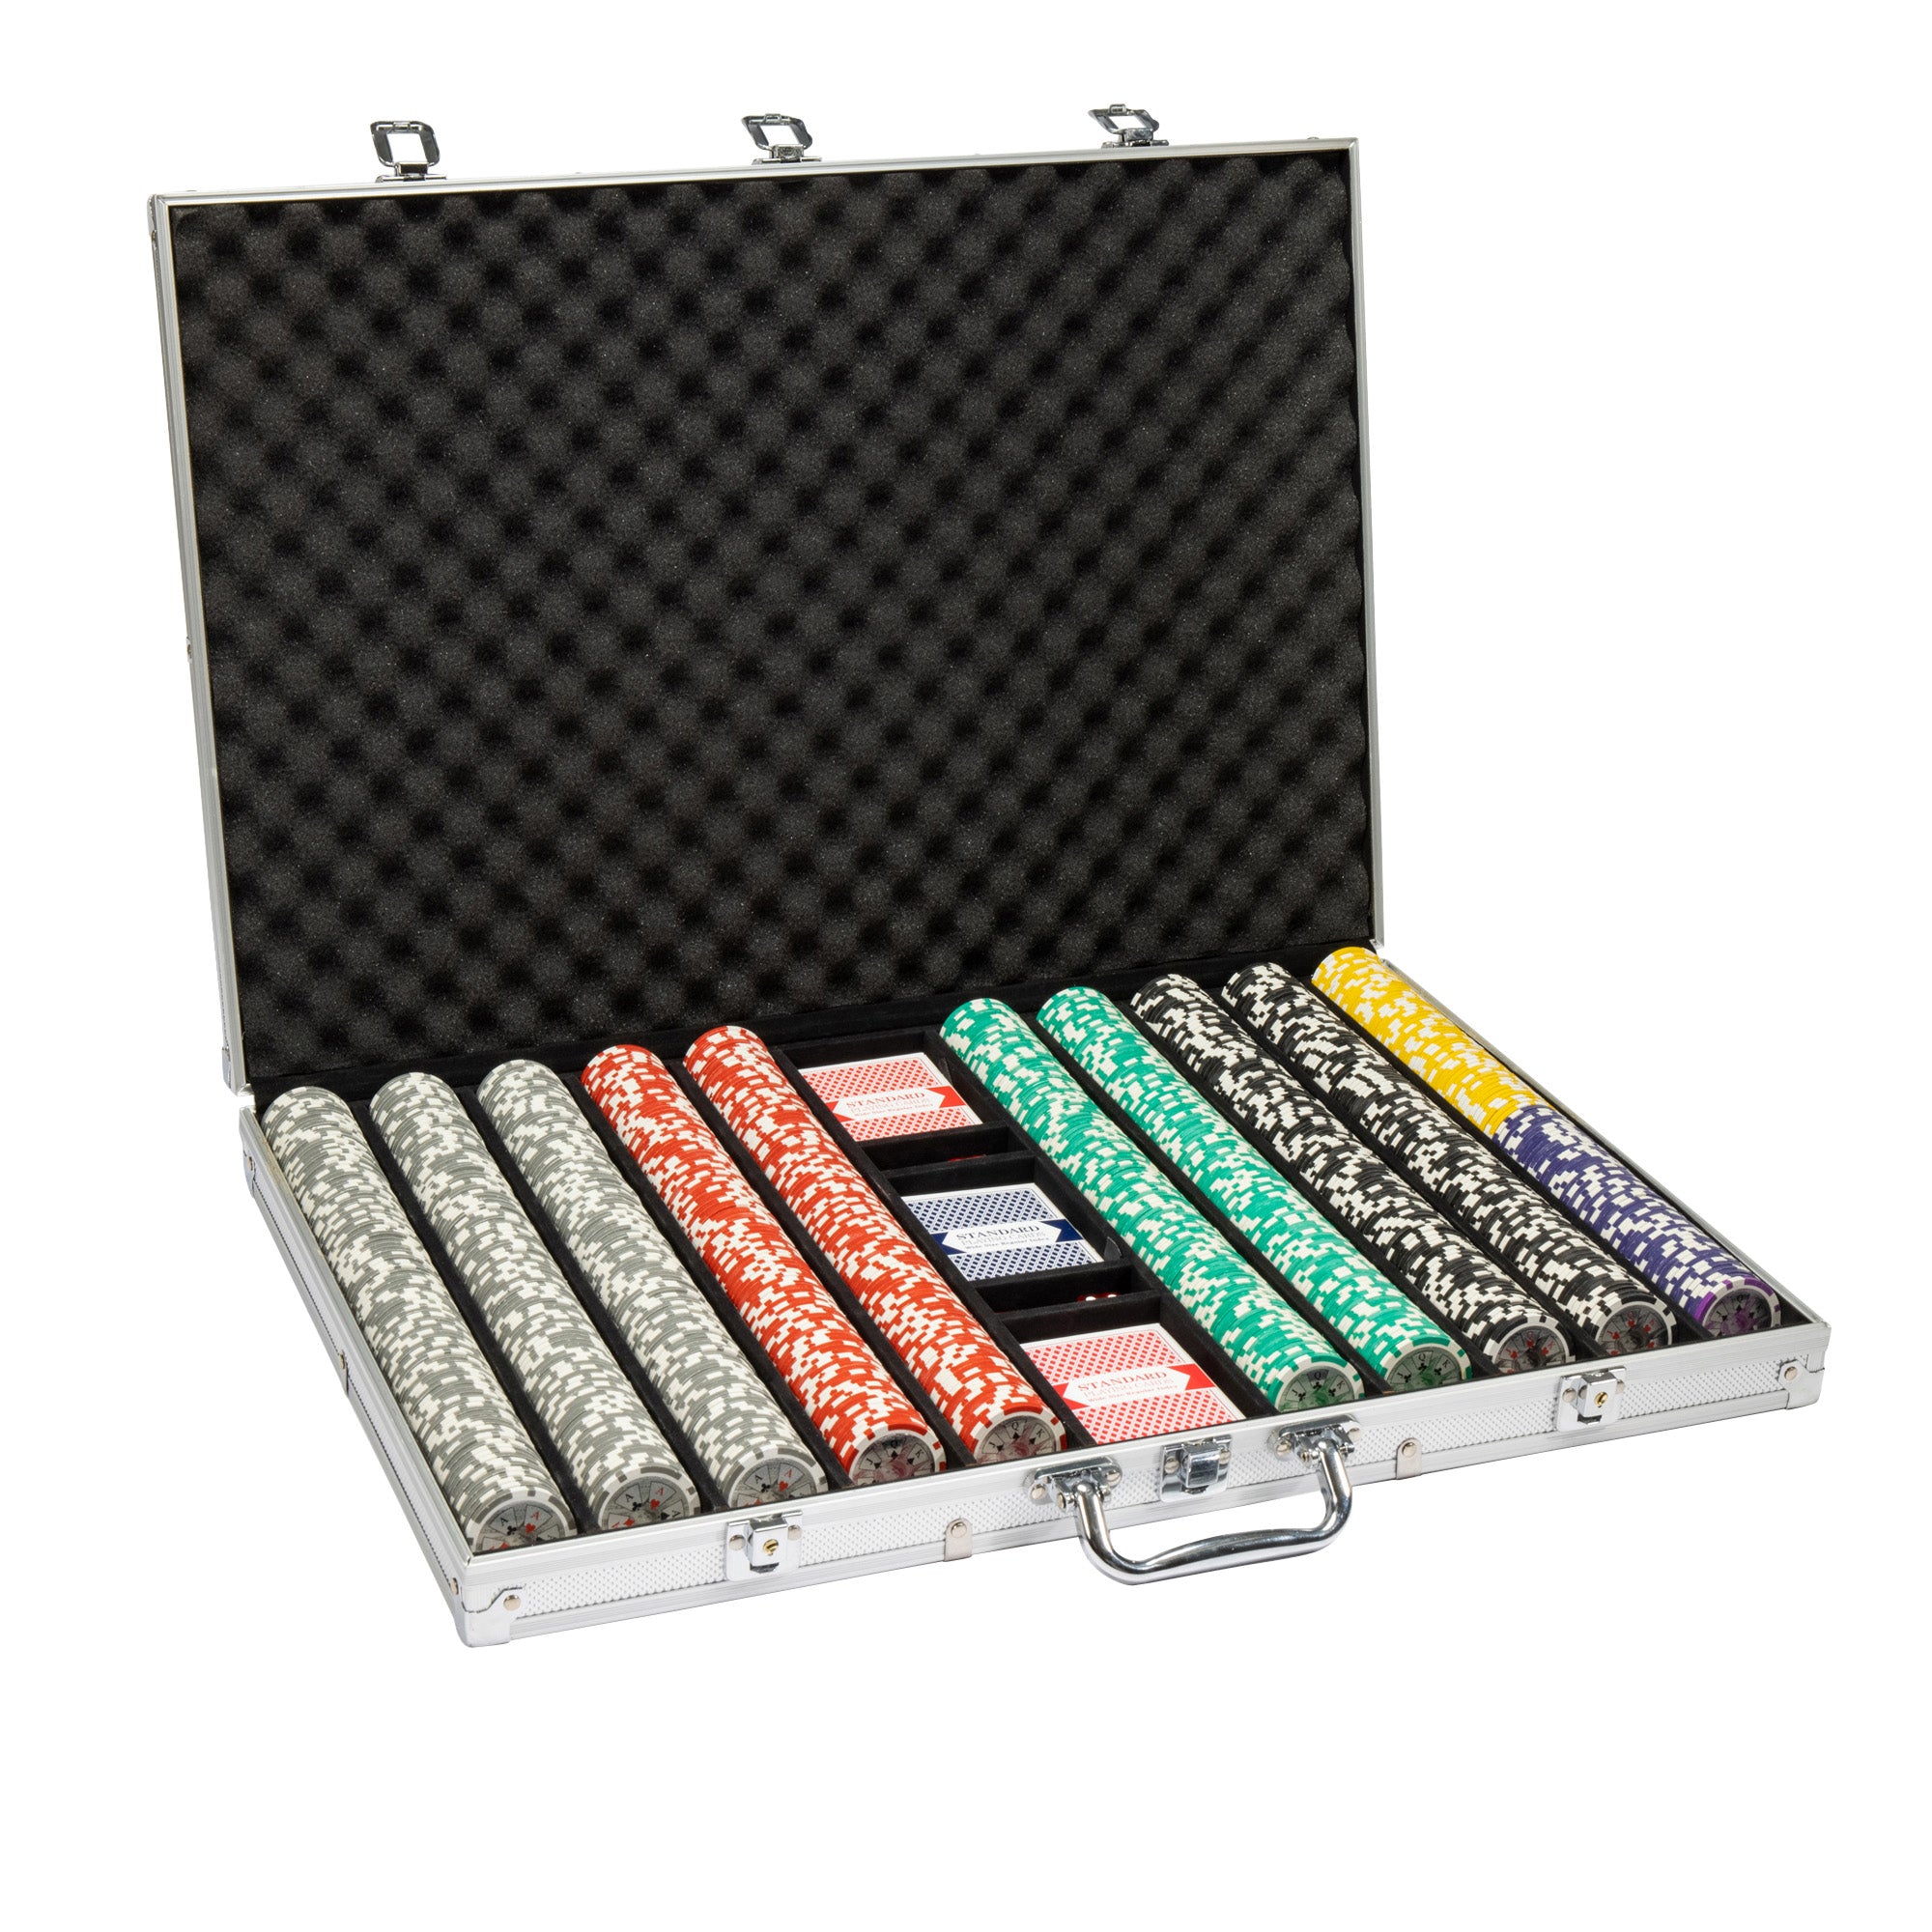 Ben Franklin 14-gram Holo Inlay Poker Chip Set in Aluminum Case (1000 Count) - Clay Composite